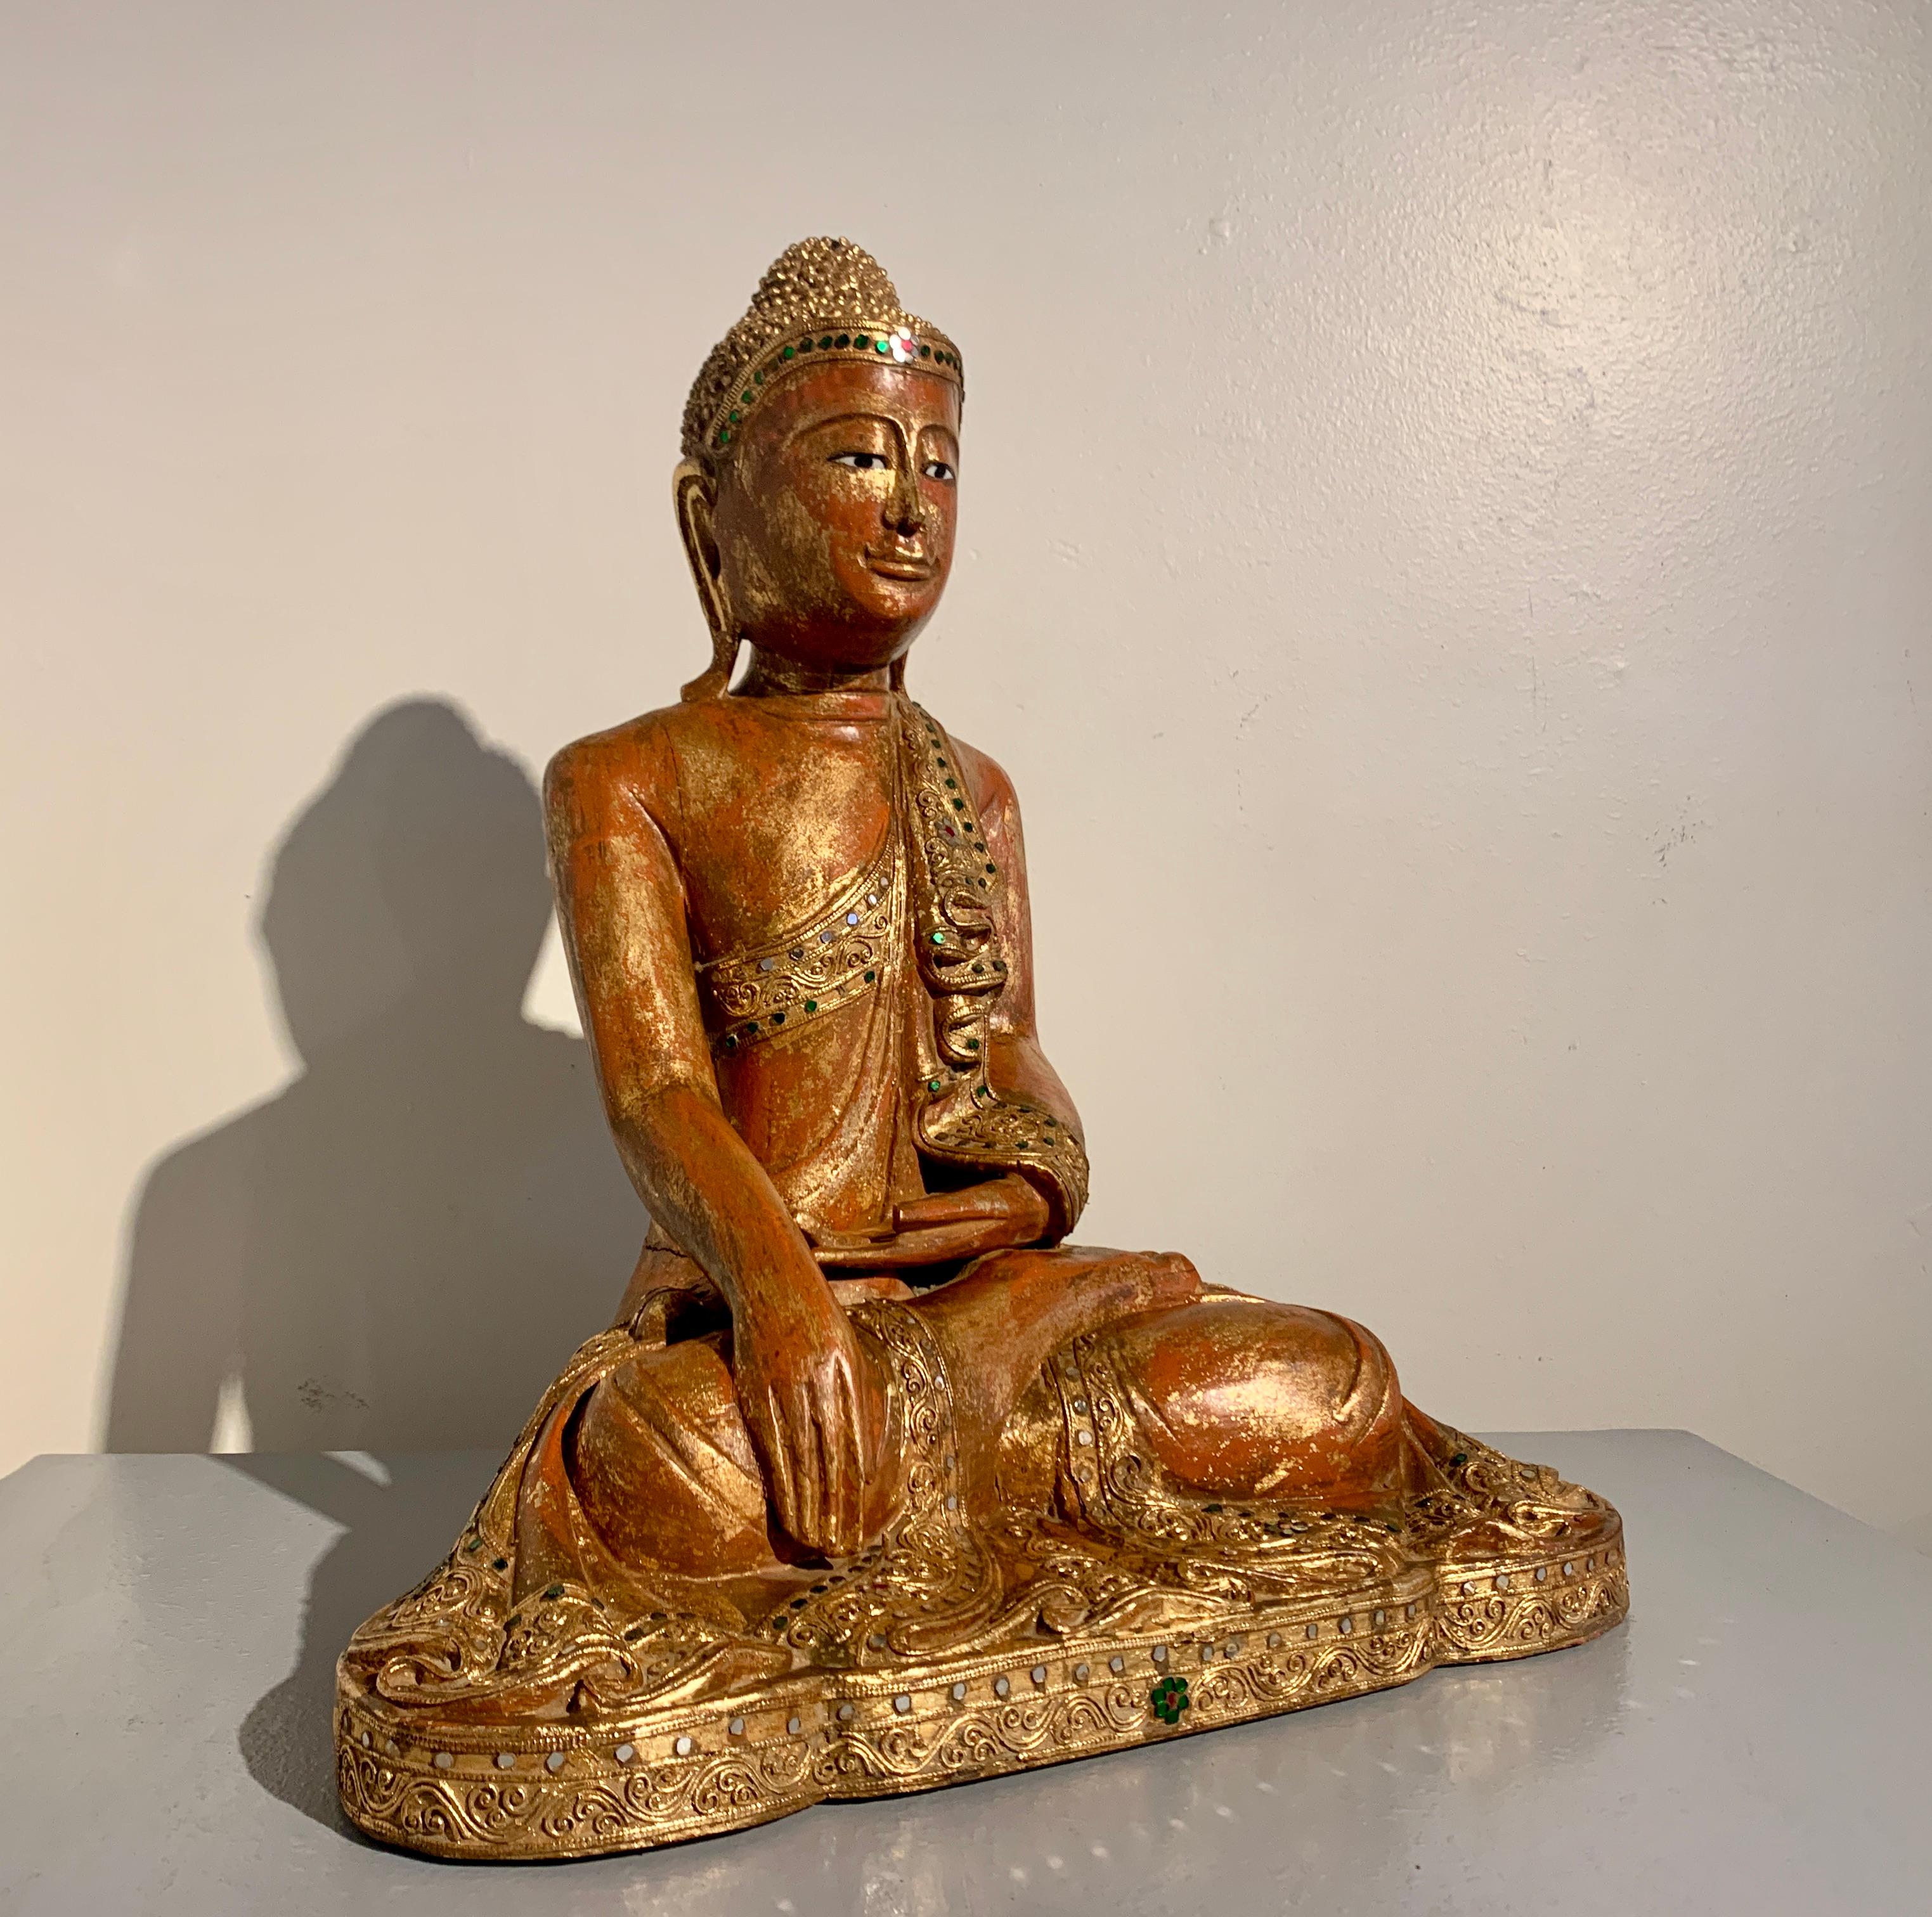 A gorgeous and serene Burmese carved teak wood figure of a seated Buddha, Mandalay style and of the period, late 19th century, Burma (Myanmar).

This elegant Buddha is portrayed seated upon a short base in the full lotus position, the soles of his